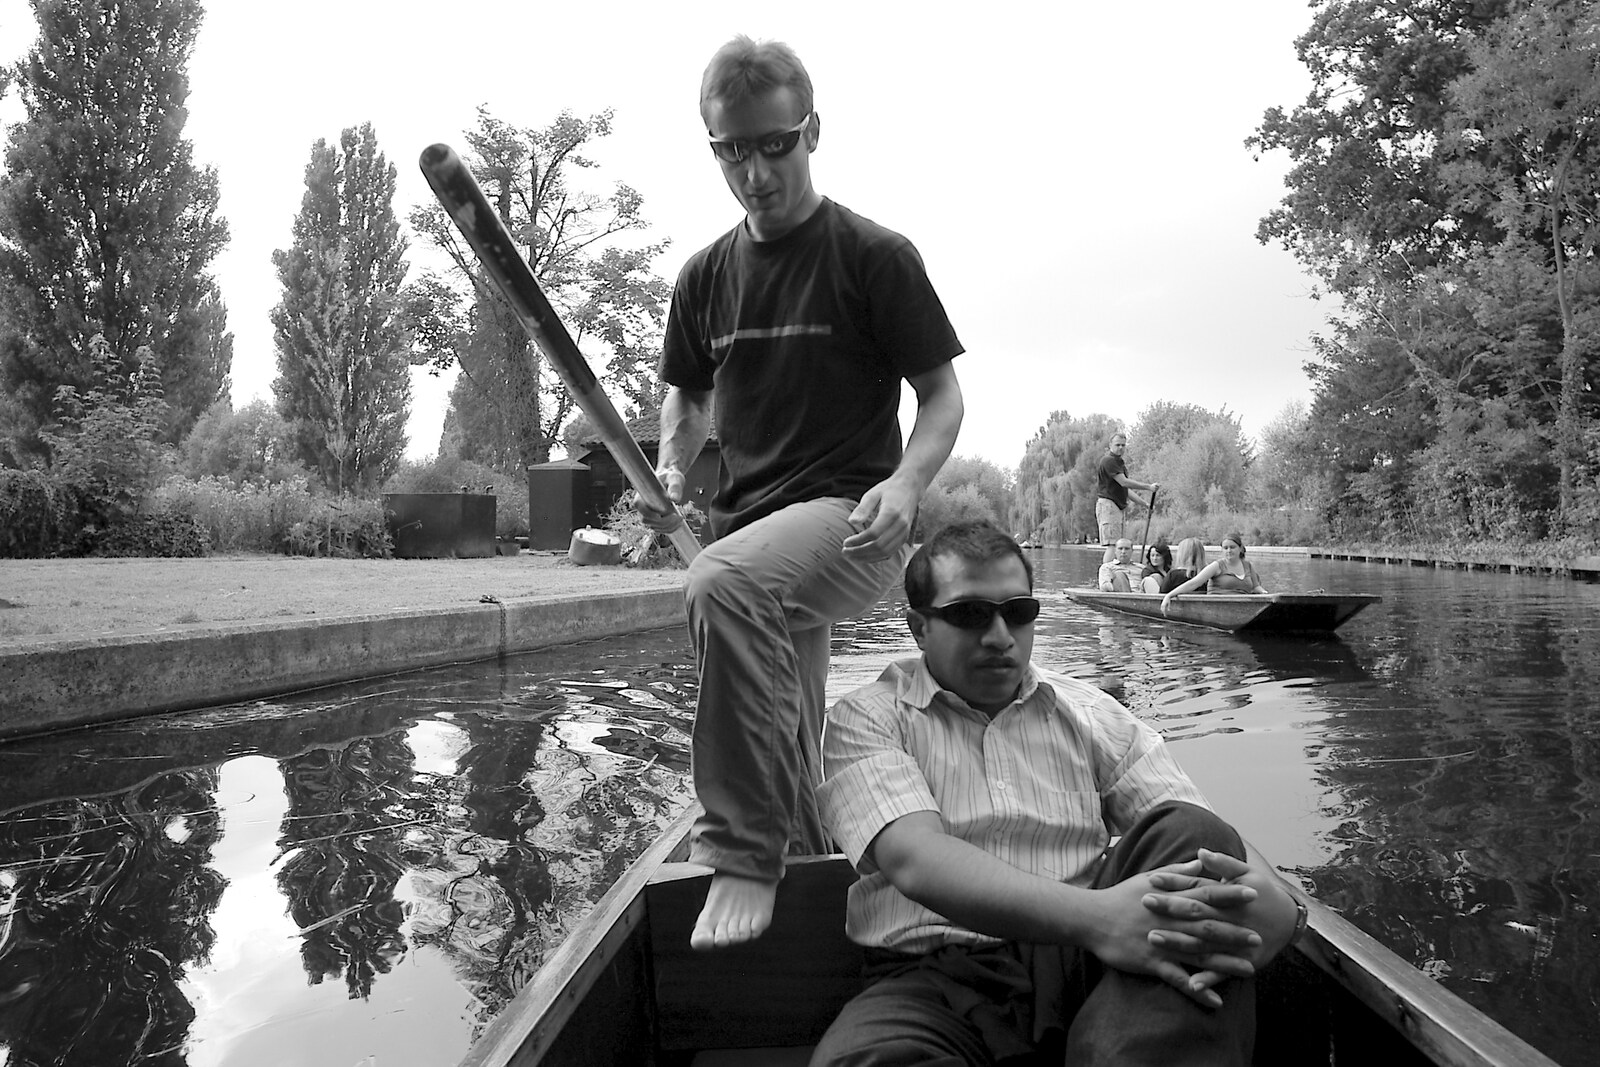 Ben gets ready to jump over a bridge from Qualcomm goes Punting on the Cam, Grantchester Meadows, Cambridge - 18th August 2005